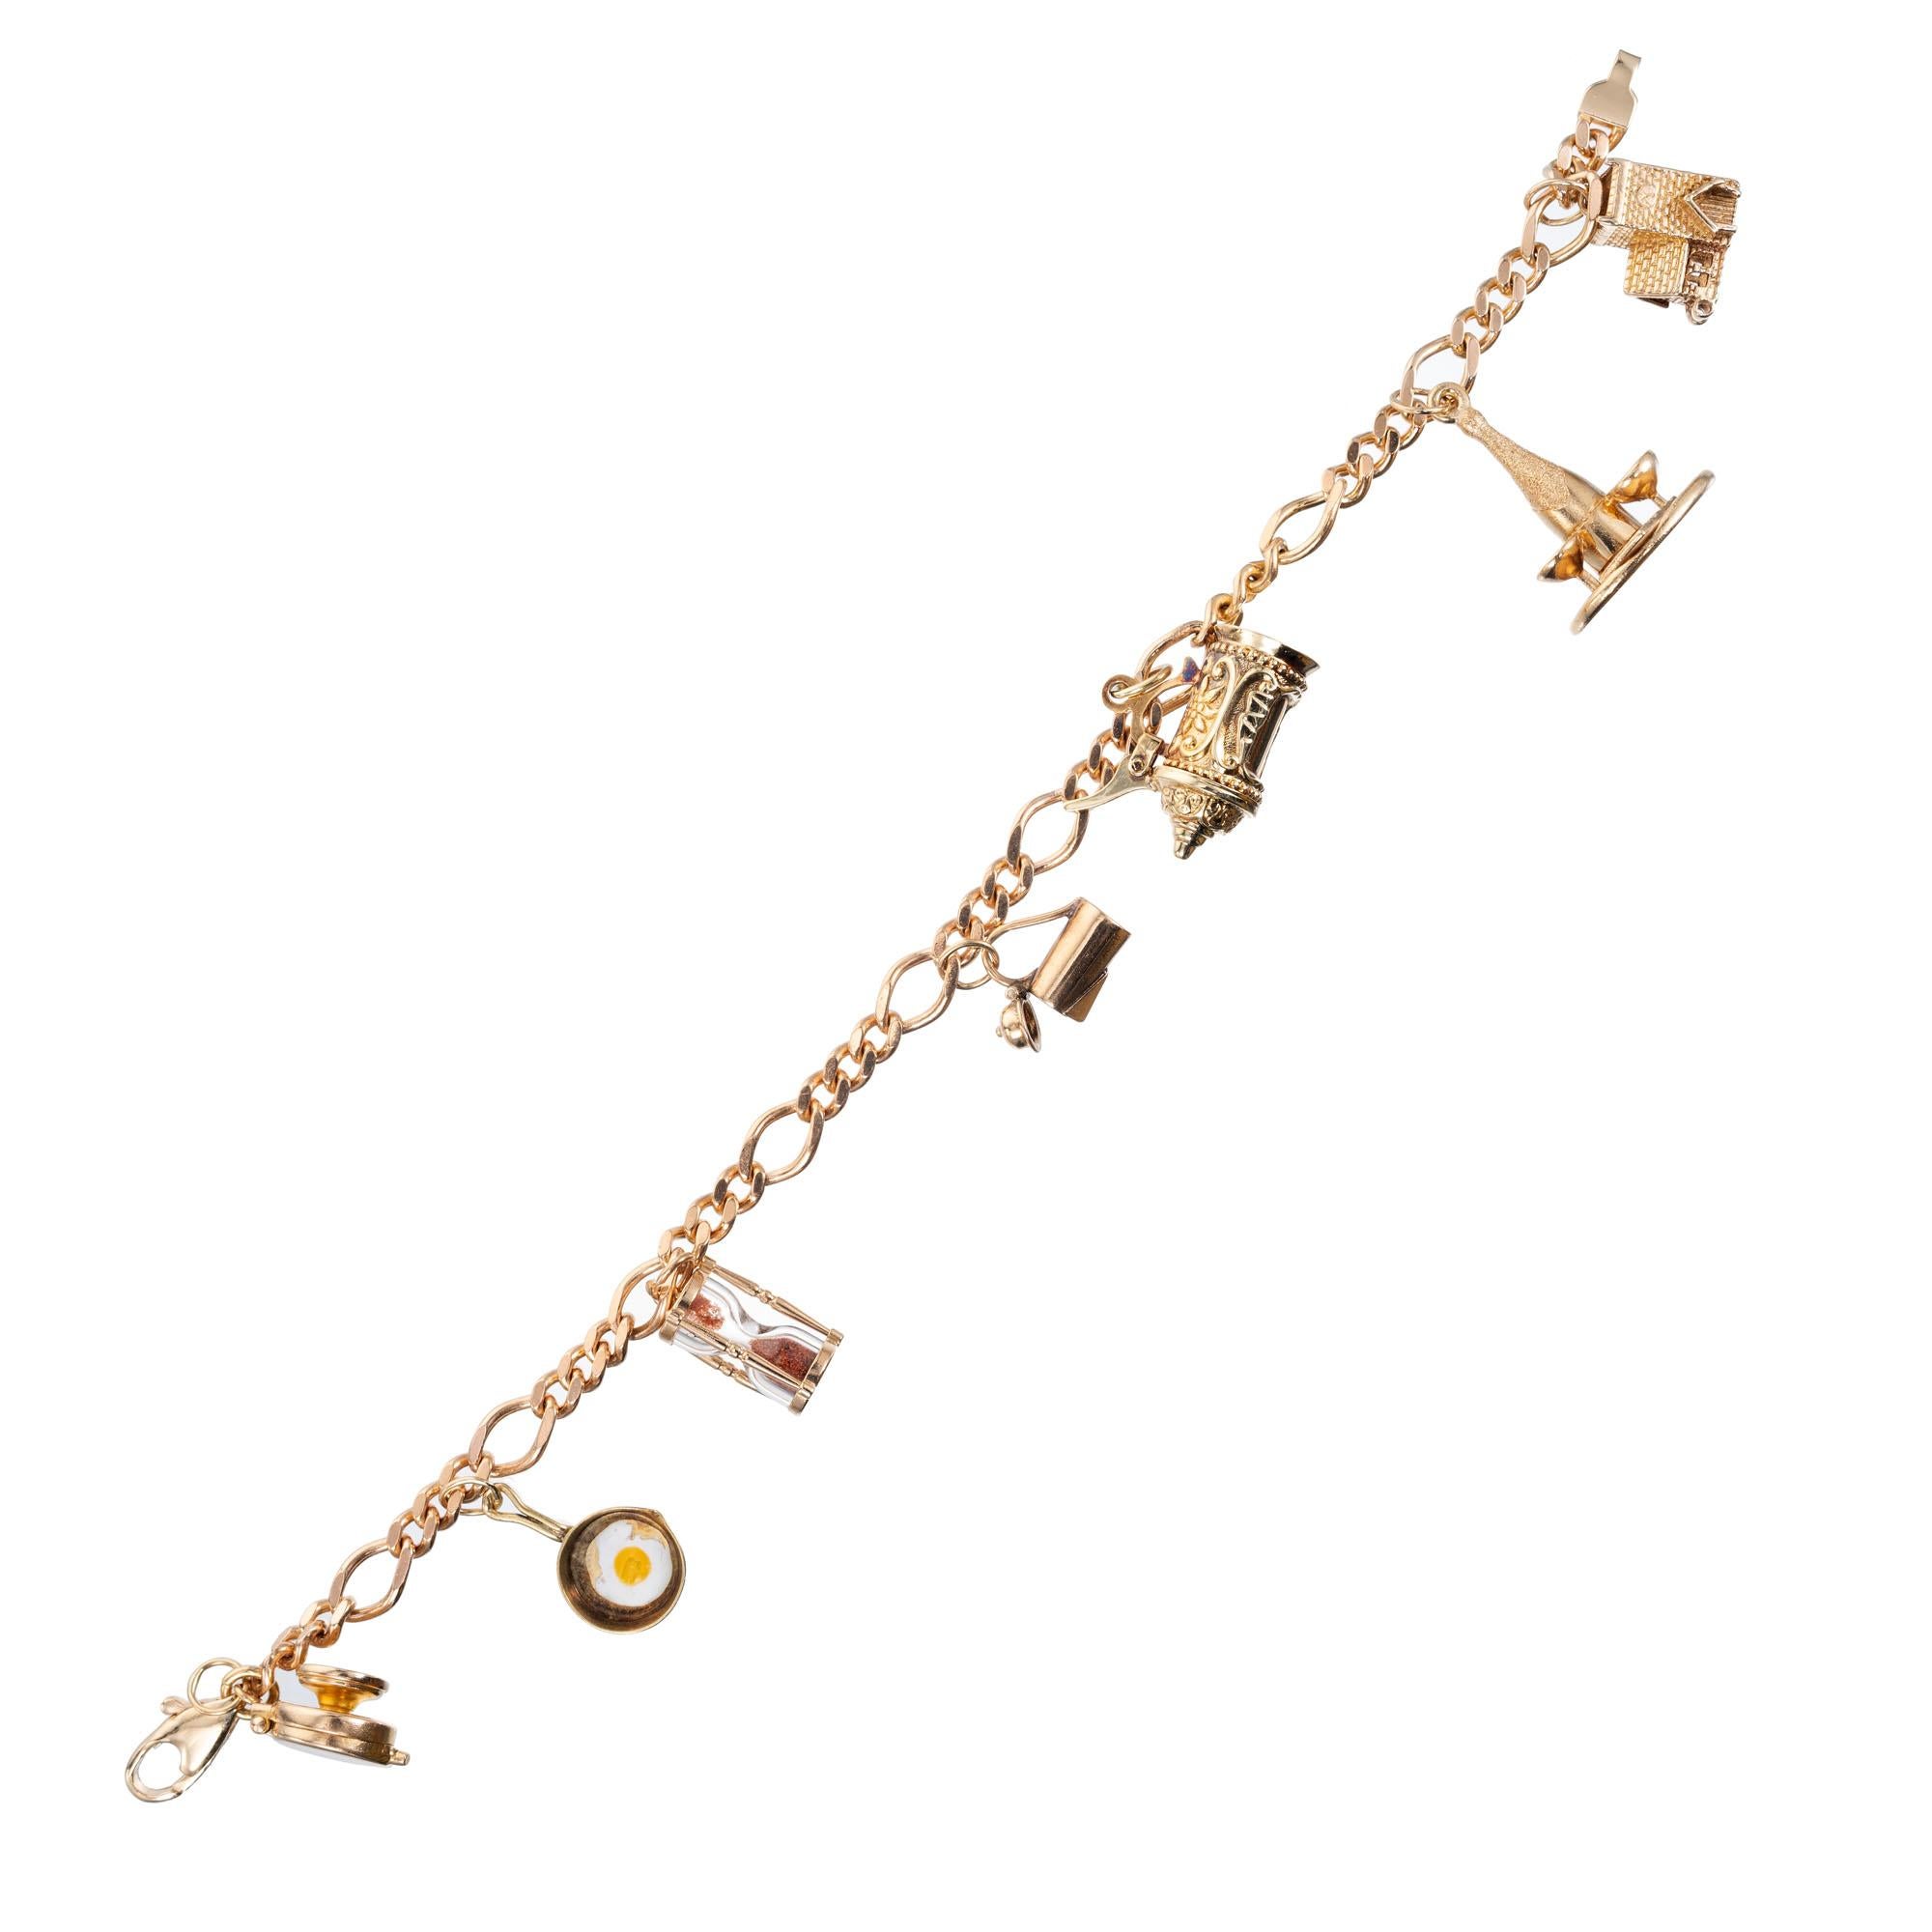 Figaro style 14k yellow gold charm bracelet. Food and drink motif charm bracelet consists of seven charms. A waffle iron, frying pan with egg, sand timer, carafe stein, champagne bottle and glasses and a tavern all in 14k yellow gold. 7.75 inches